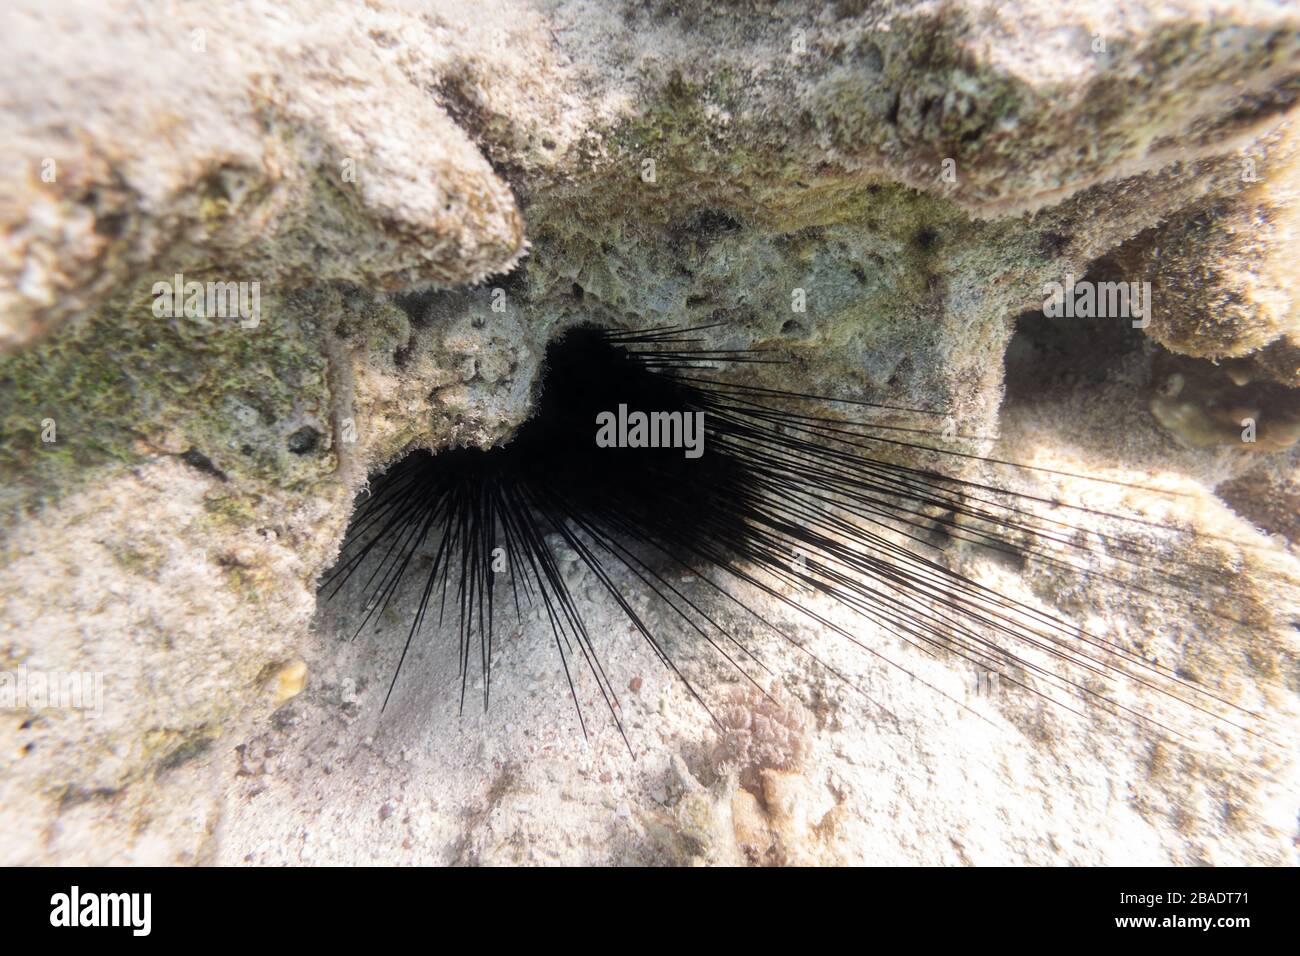 Long Spines Of Sea Urchin (Diadema Setosum) Hiden In The Rocks And Sand. Seabed Near Coral Reef In Shallow Water. Dangerous Underwater Animal With Bla Stock Photo